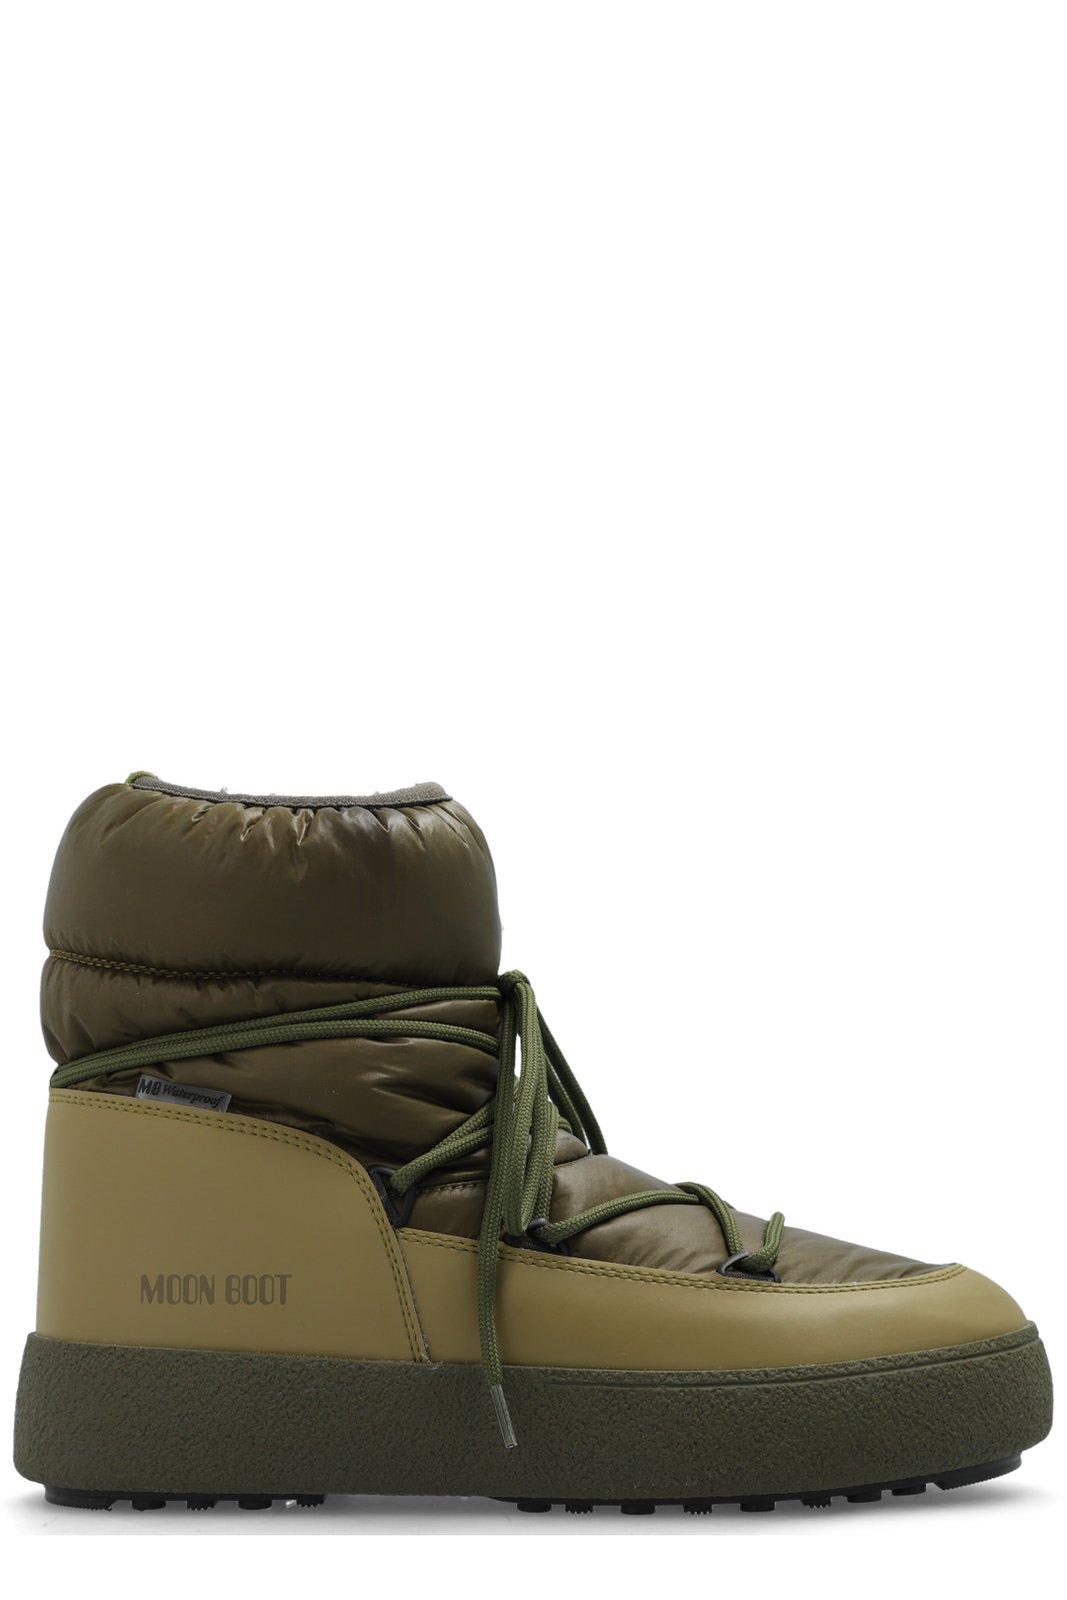 Shop Moon Boot Mtrack Low Padded Boots In Kaki